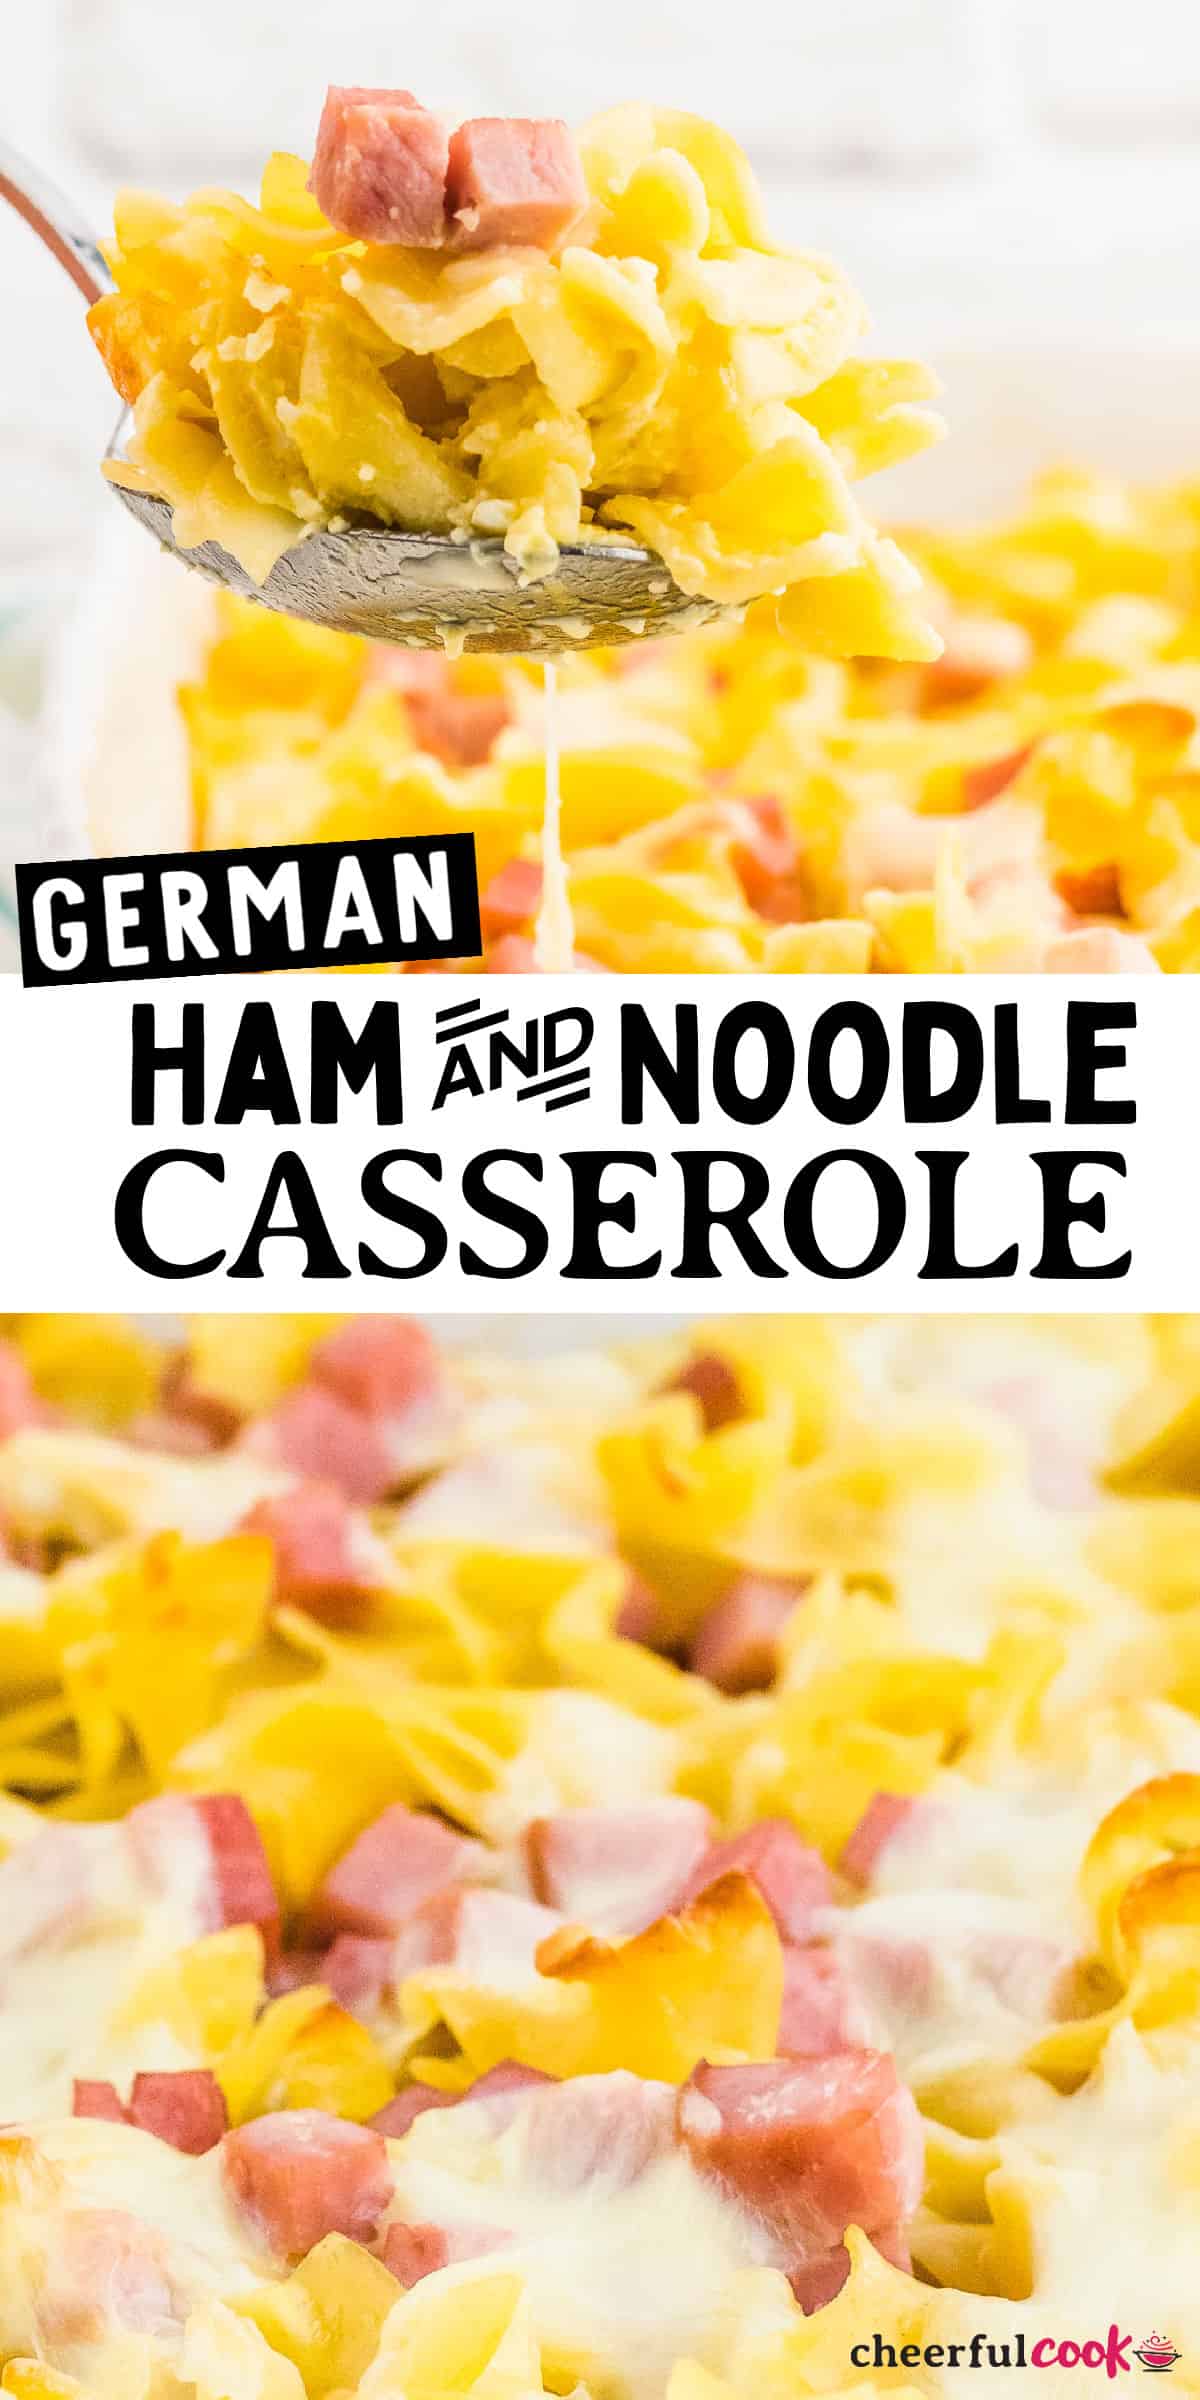 This hearty, creamy, and cheesy ham and noodle casserole is the perfect choice for a quick and easy weeknight dinner. Made with tender pasta, a quick egg and cream sauce, diced ham, and delicious cheese. #cheerfulcook #eggnoodles #casserole #recipe #Germanfood via @cheerfulcook